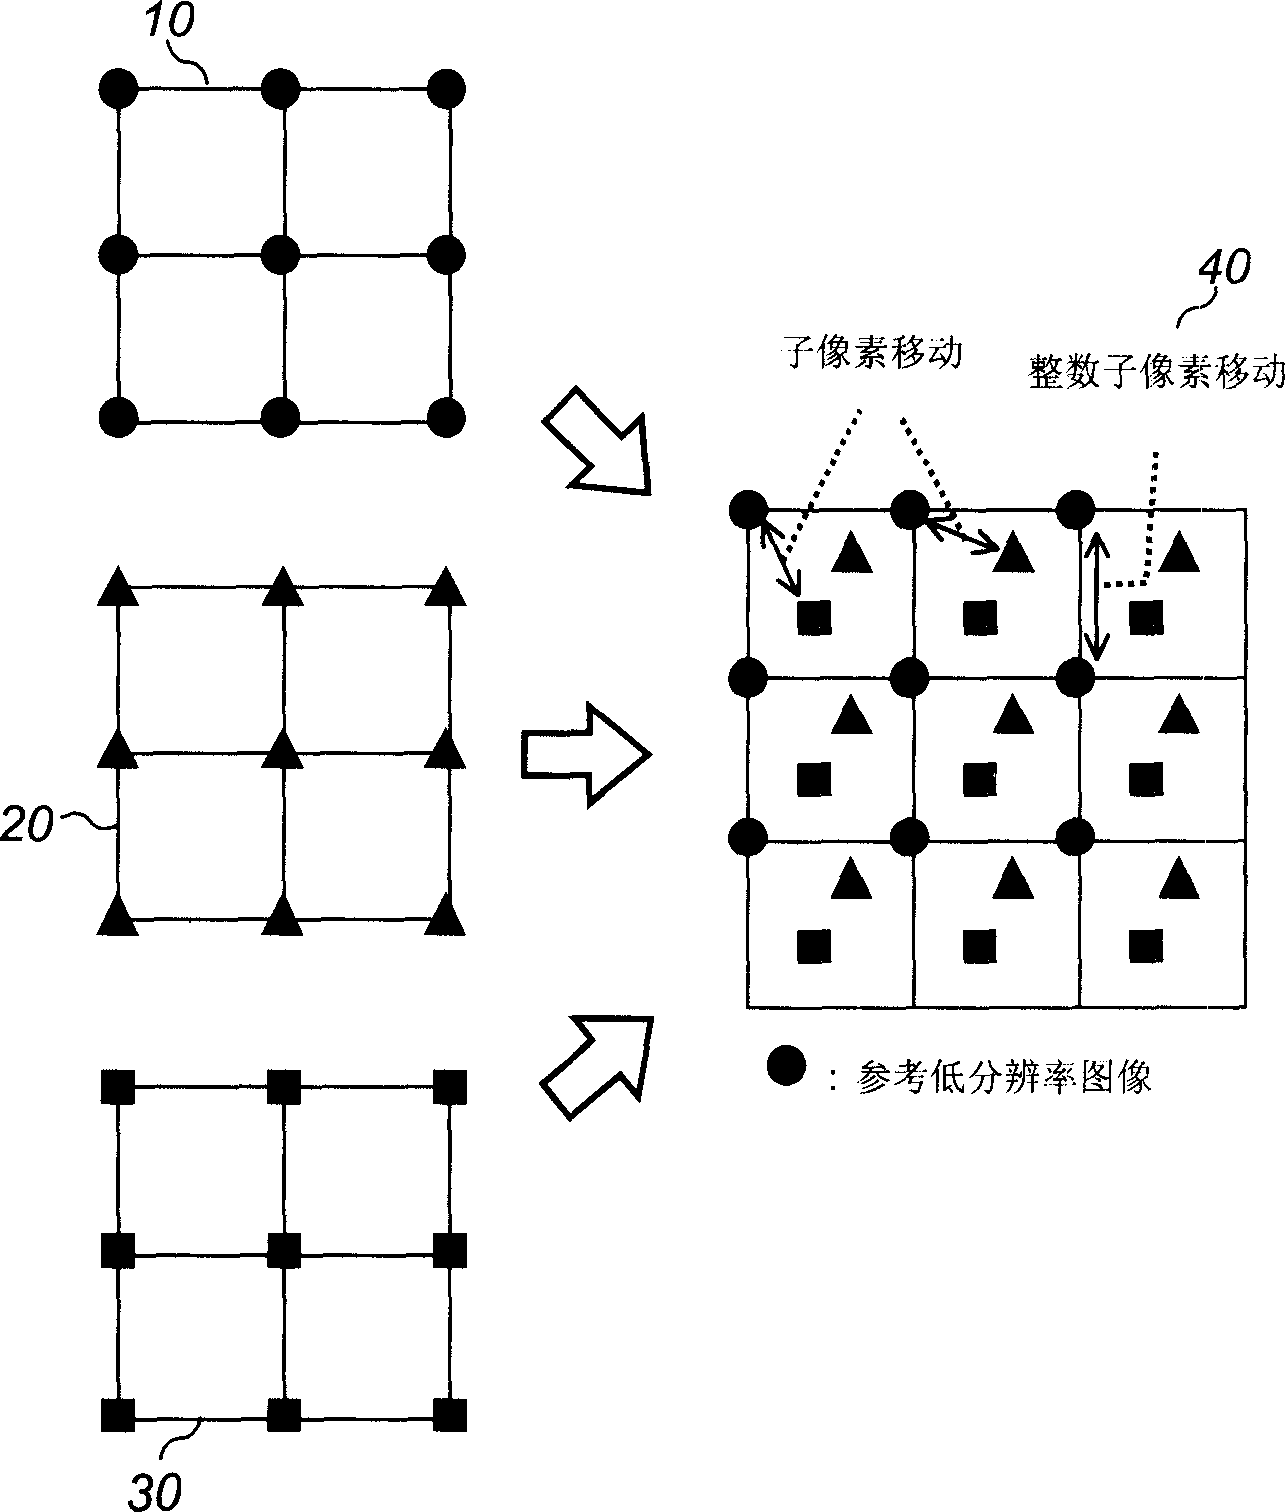 Method for recovering and reconsisting super-resolution image from low-resolution compression image